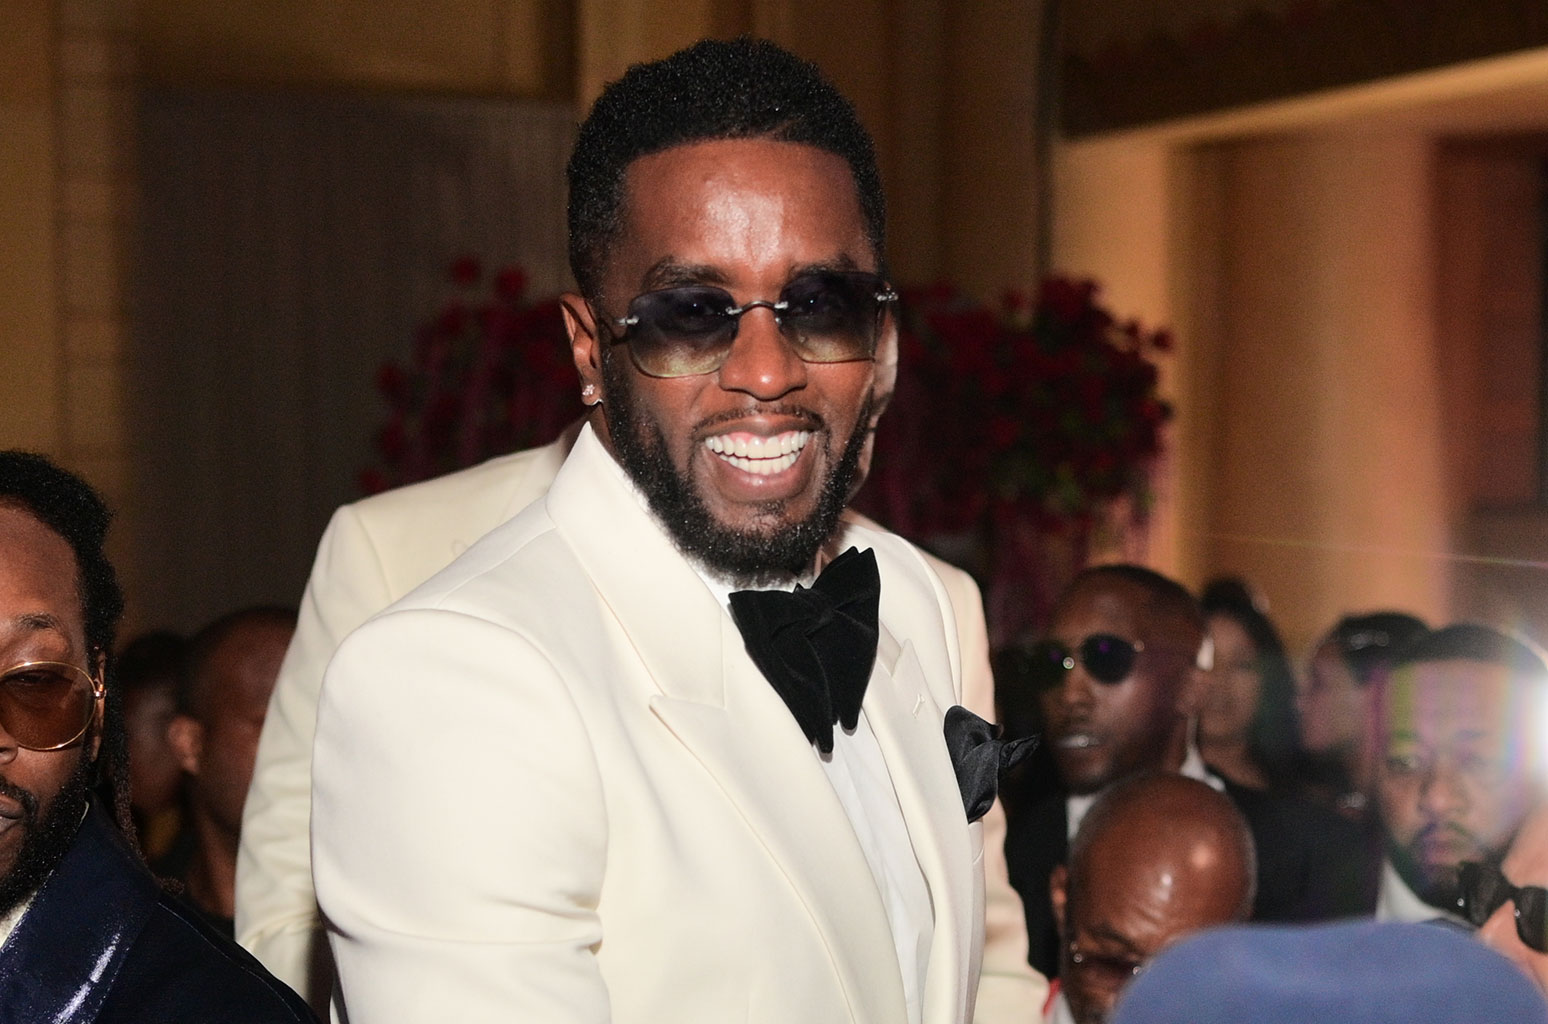 Diddy Reveals the One Rapper He'd Battle on 'Verzuz'